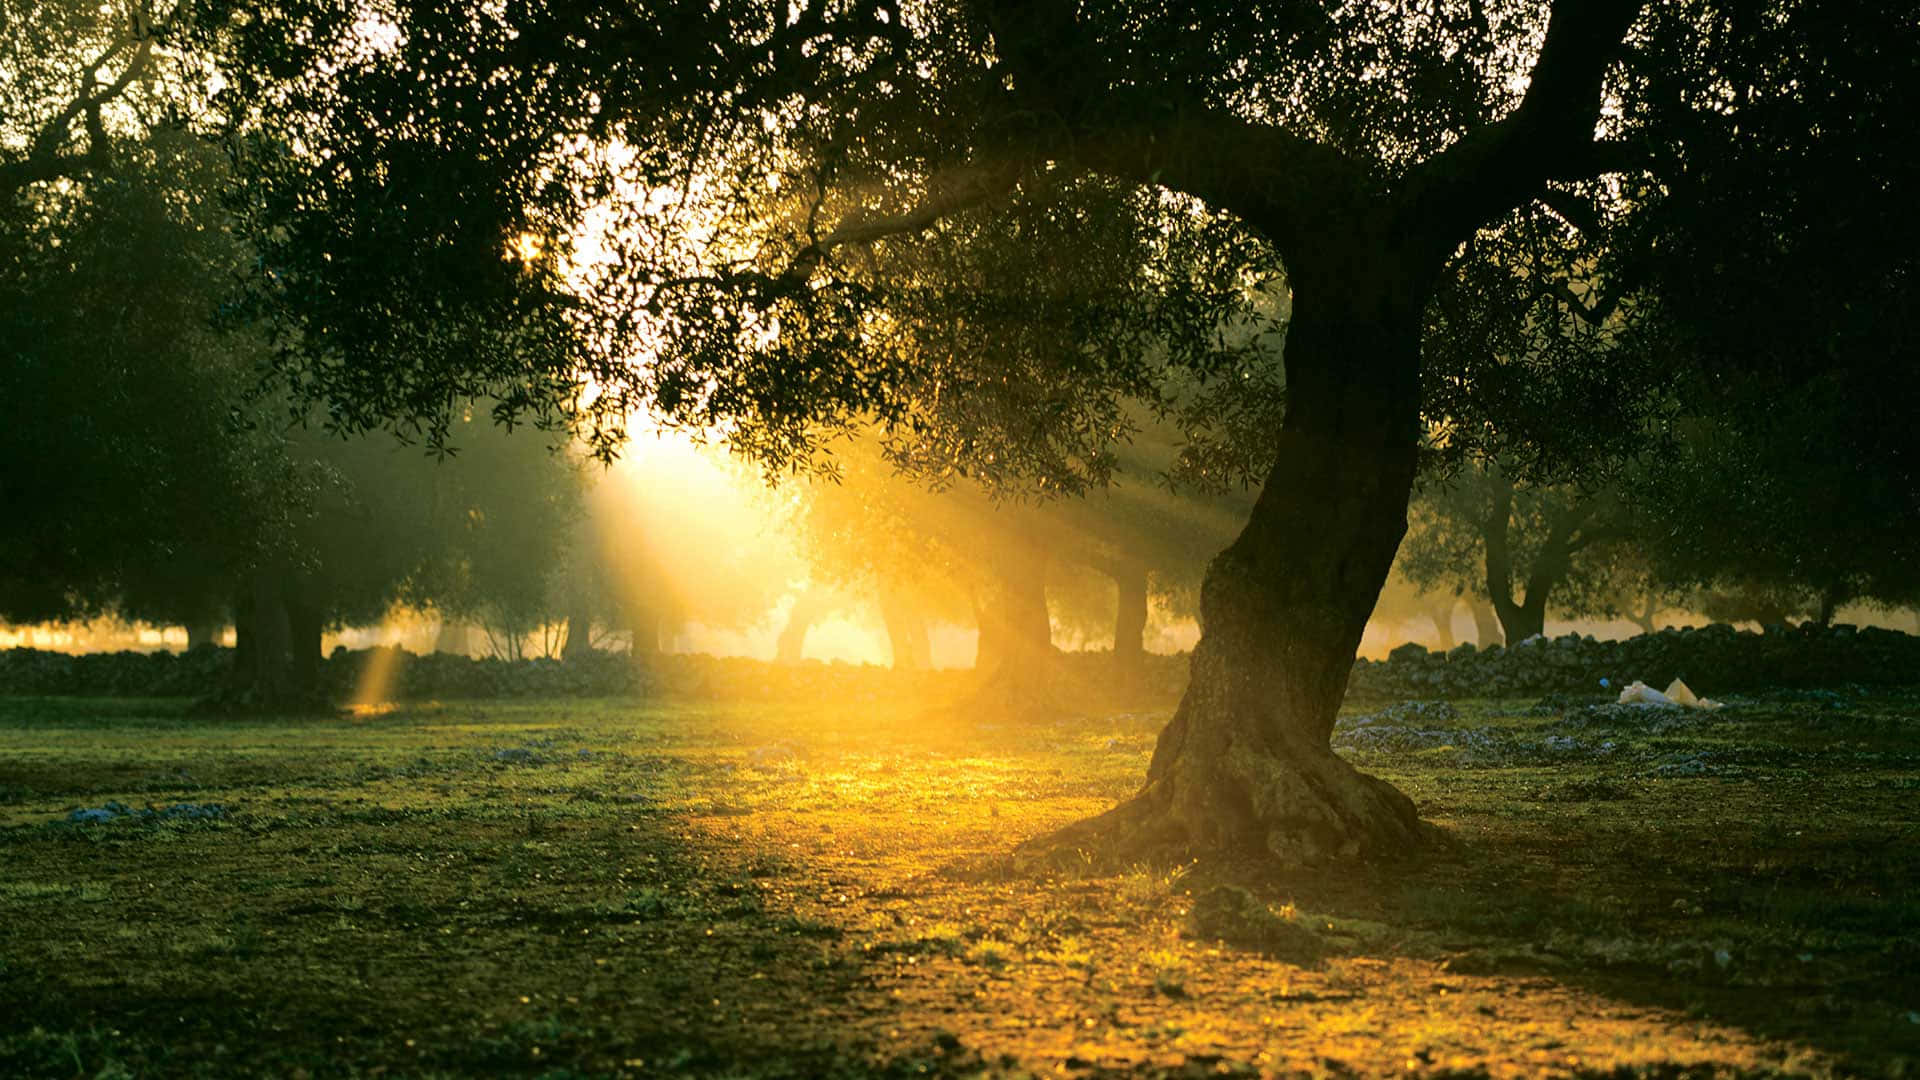 Dive into the beauty of nature and take in the serenity of an olive tree in the Greek countryside. Wallpaper